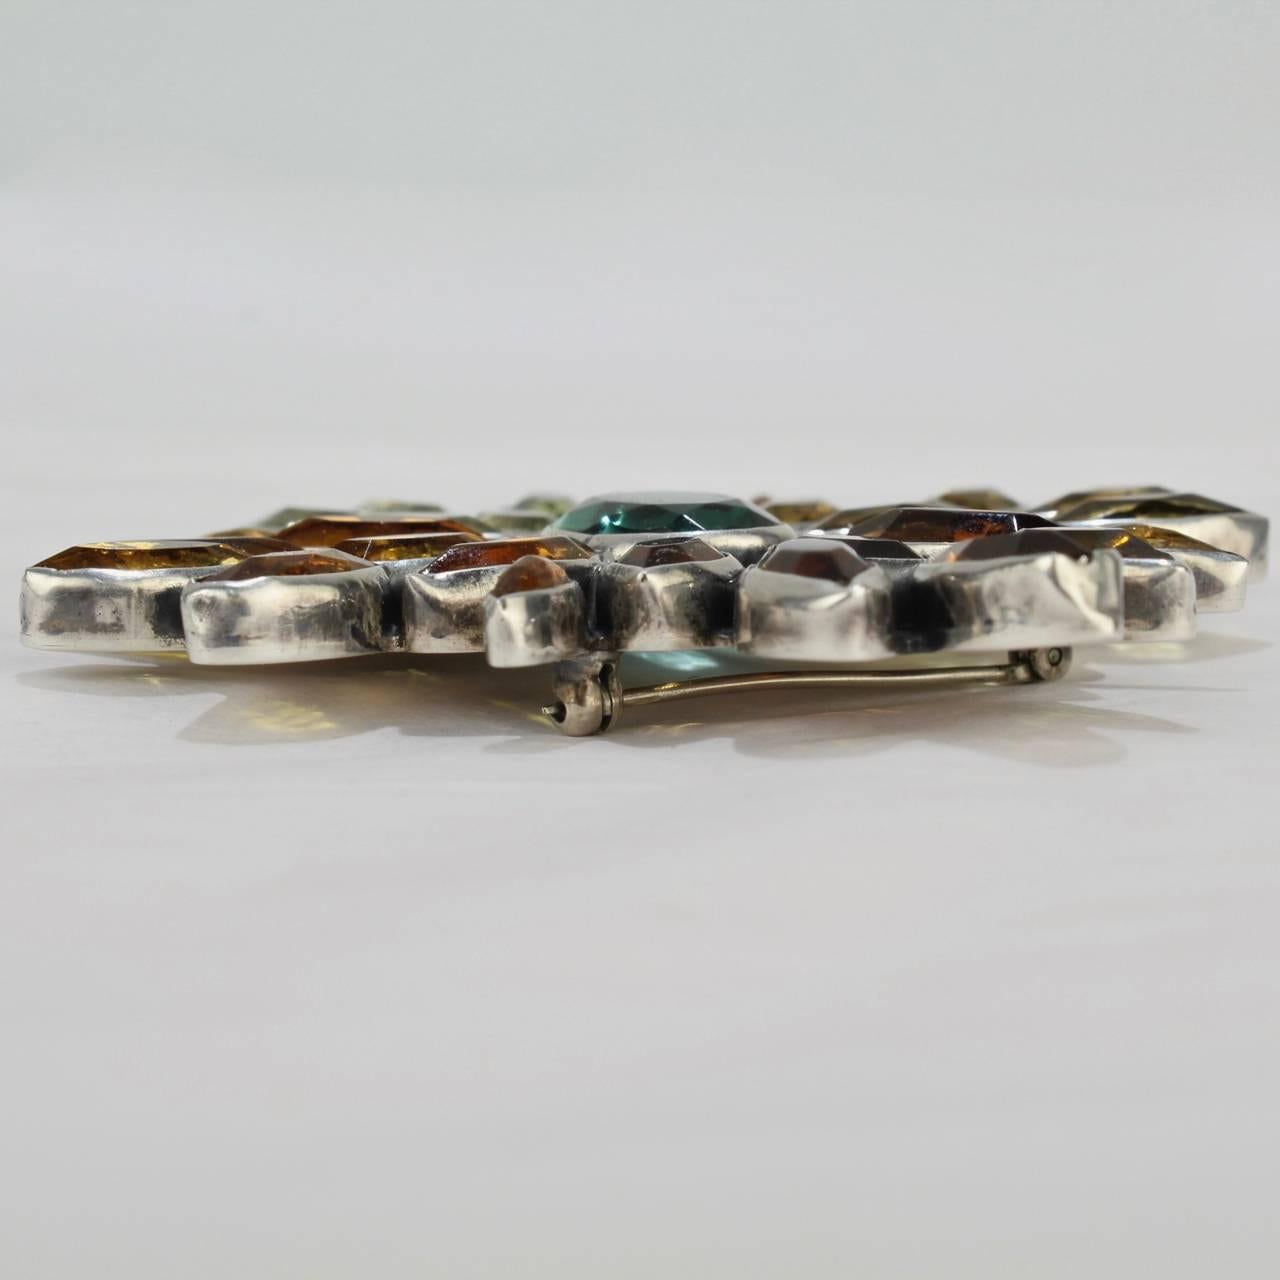 Artisan Federico Jimenez Mexican Sterling Silver, Citrine and Aquamarine Brooch or Pin